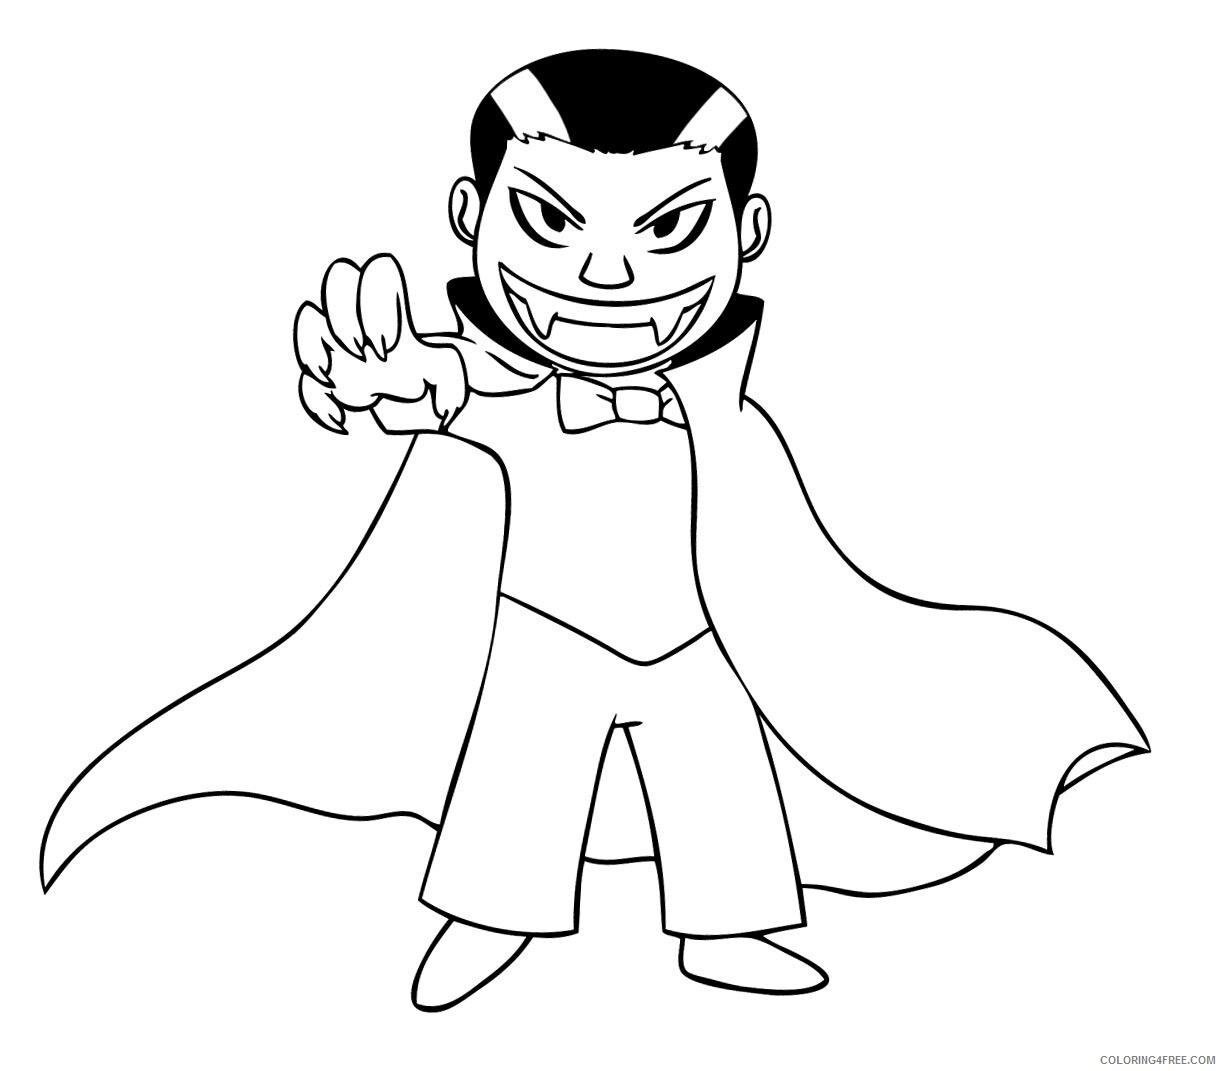 Vampire Coloring Pages Free Vampire Printable 2021 6153 Coloring4free